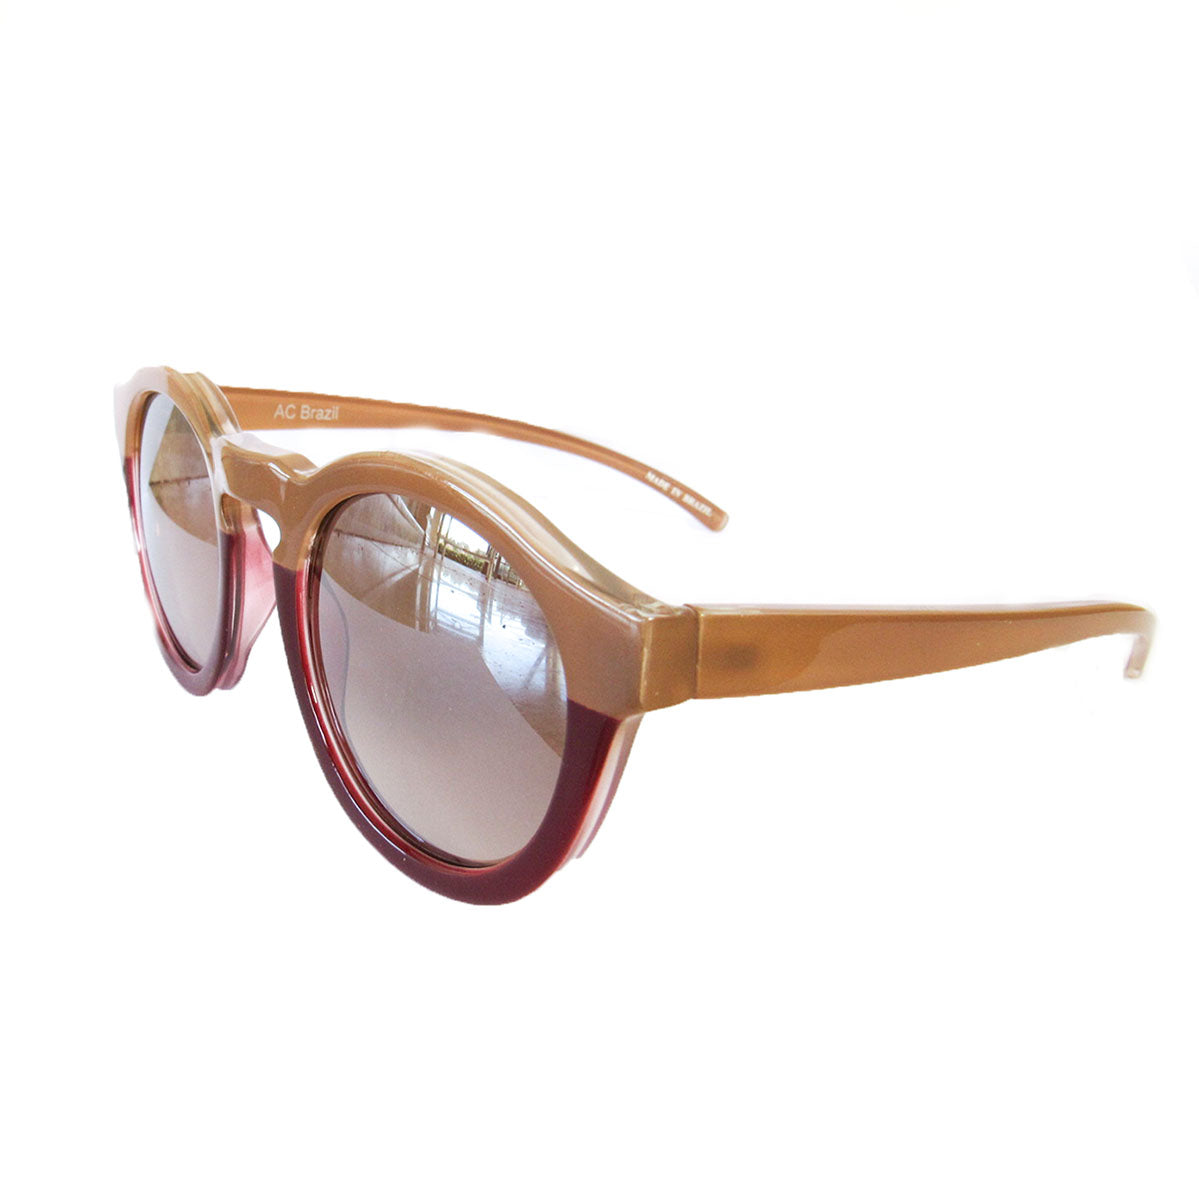 Round Nude and Burgundy Coloured Sunglasses w/ Silver Mirrored Lenses